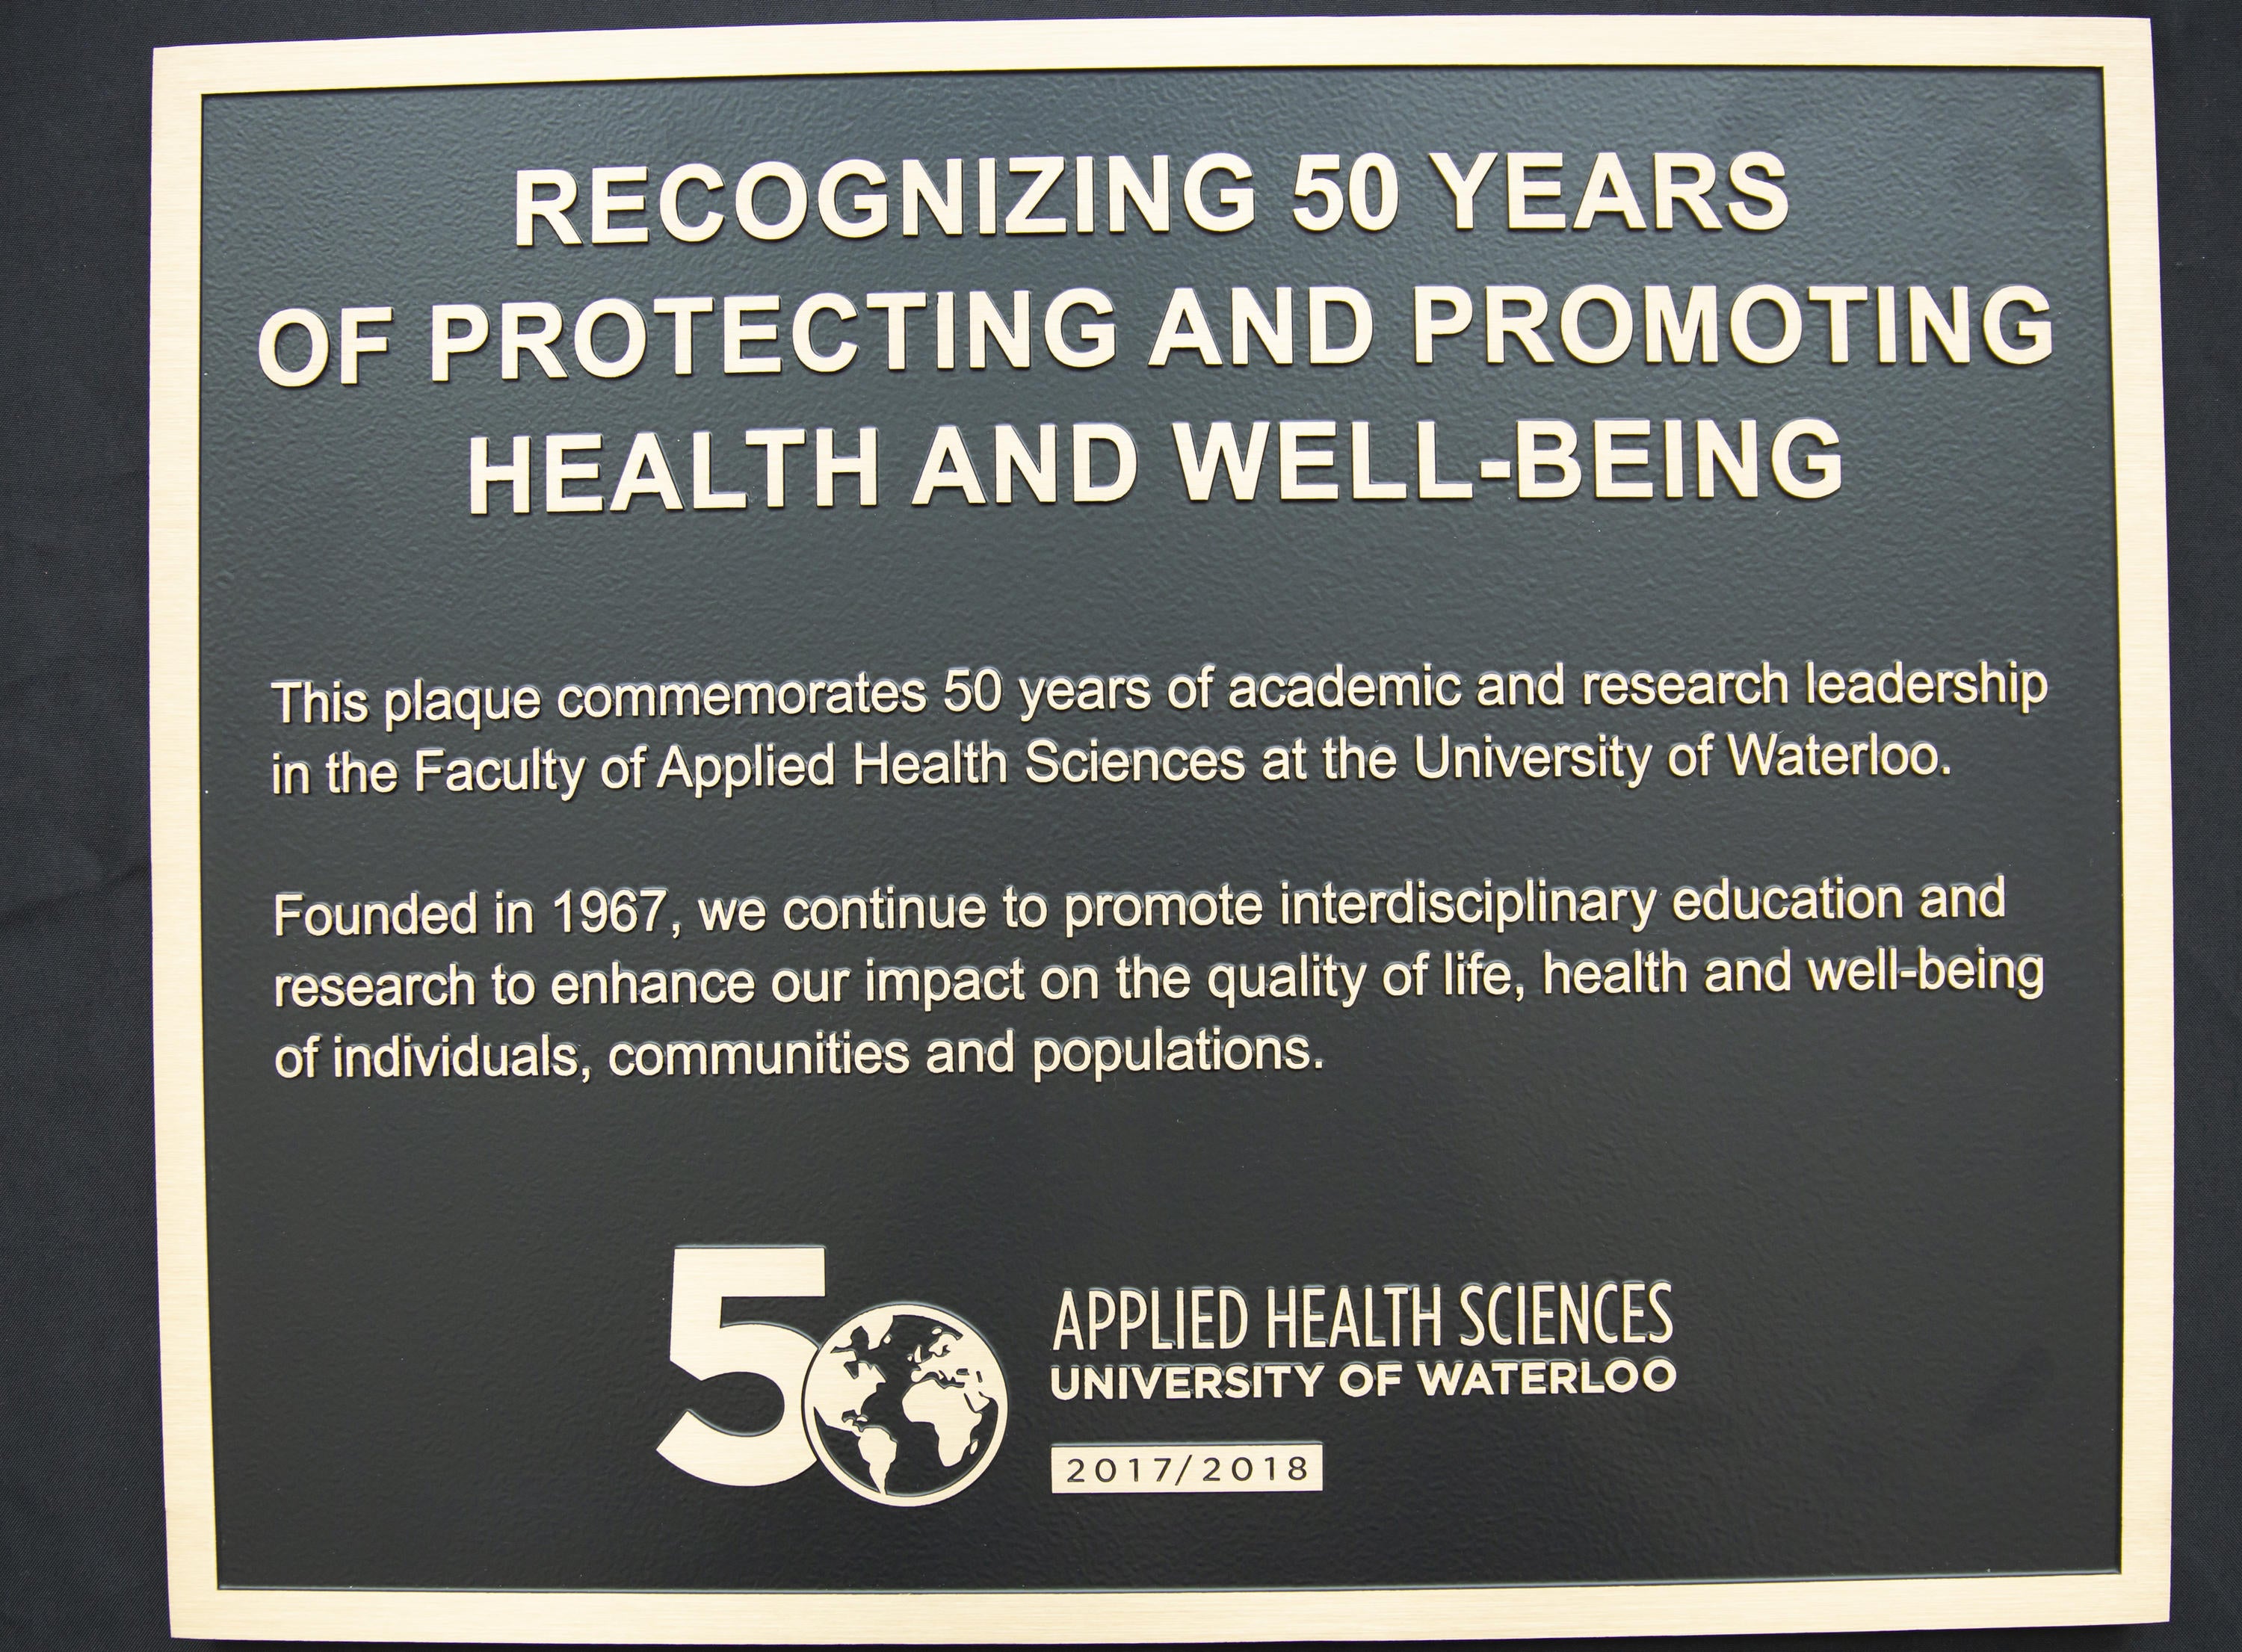 50th anniversary plaque that will be installed in the courtyard